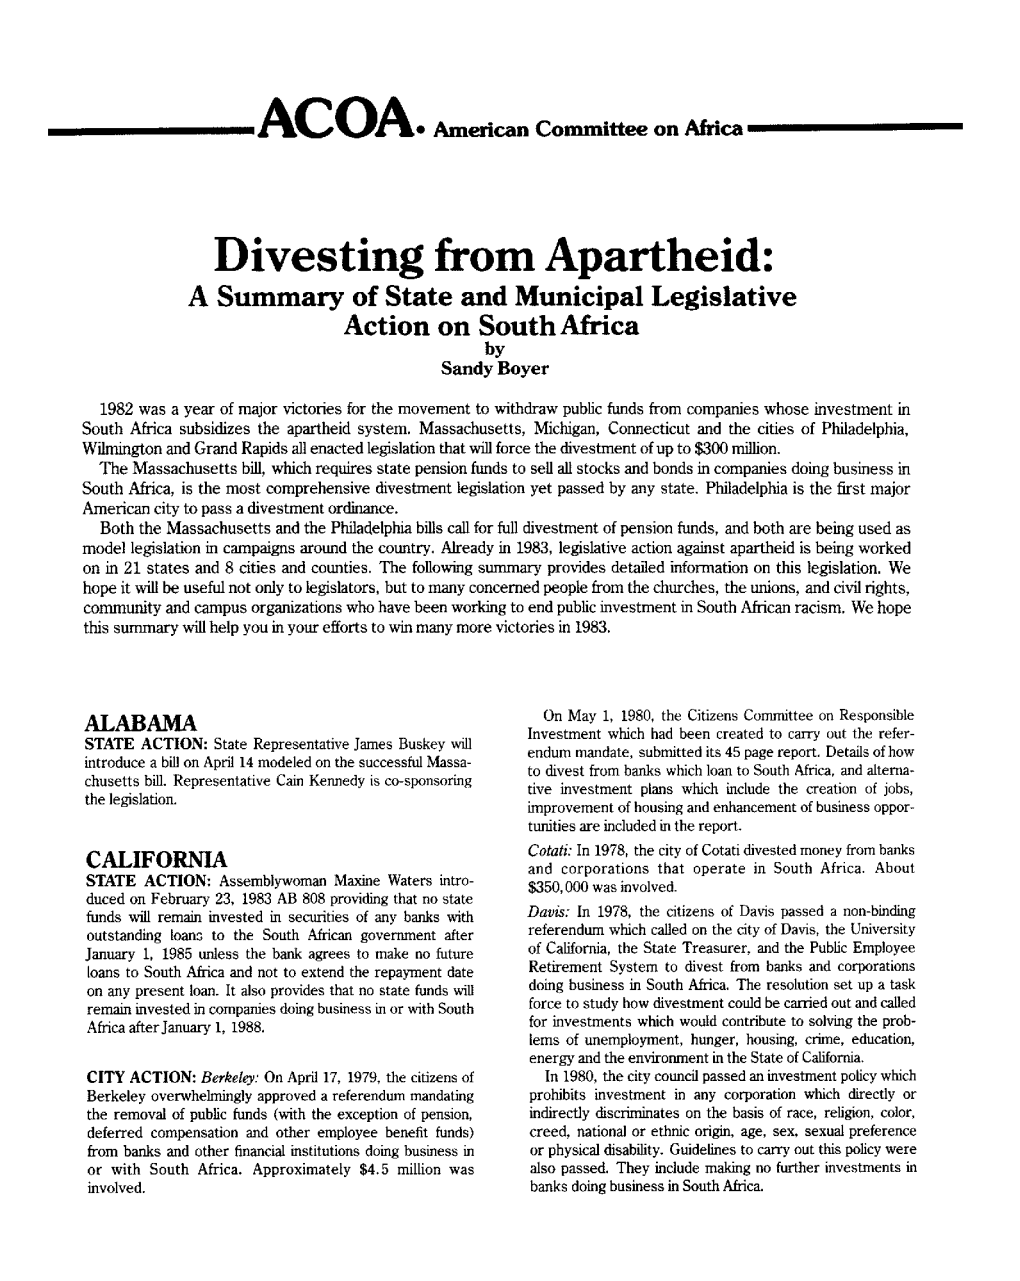 Divesting from Apartheid: a Summary of State and Municipal Legislative Action on South Africa by Sandy Boyer